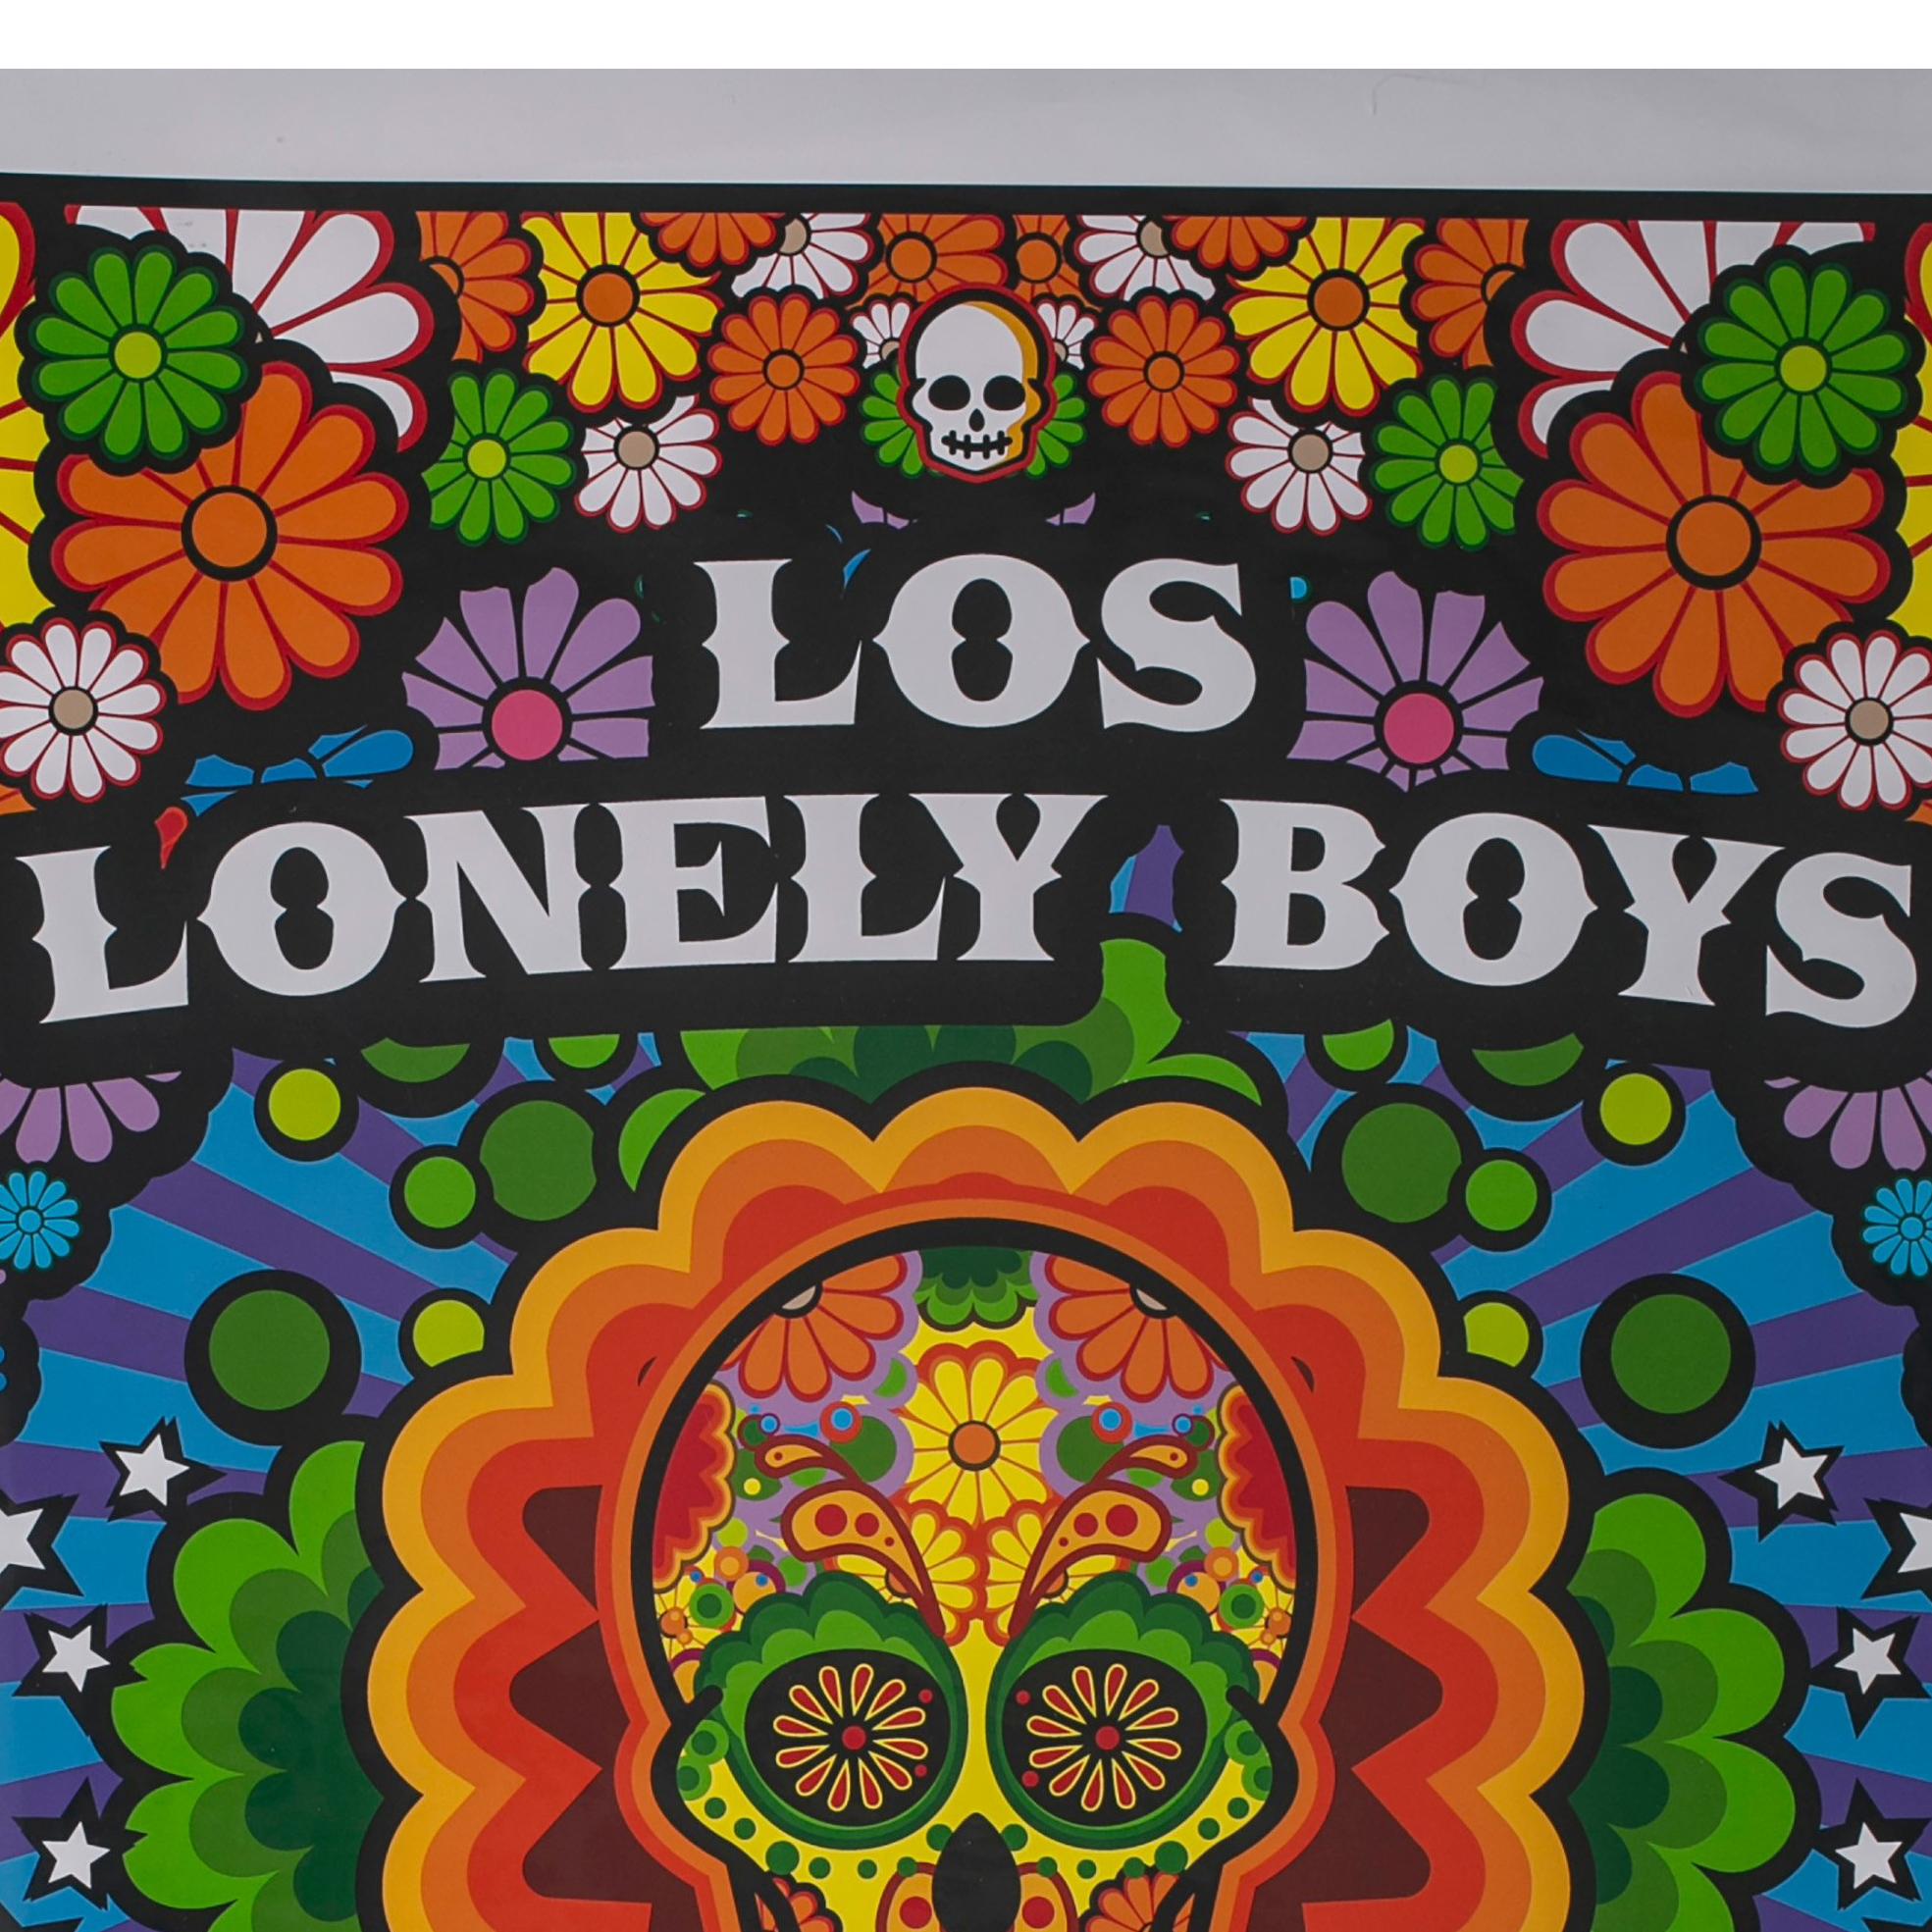 Los Lonely Boys Poster with Alejandro Escovedo. Concert was held on October 30, 2008 at the House of Blues in Houston Texas. This poster has been hand signed by Uncle Charlie.

The artwork will be shipped with a Certificate of Authenticity issued by